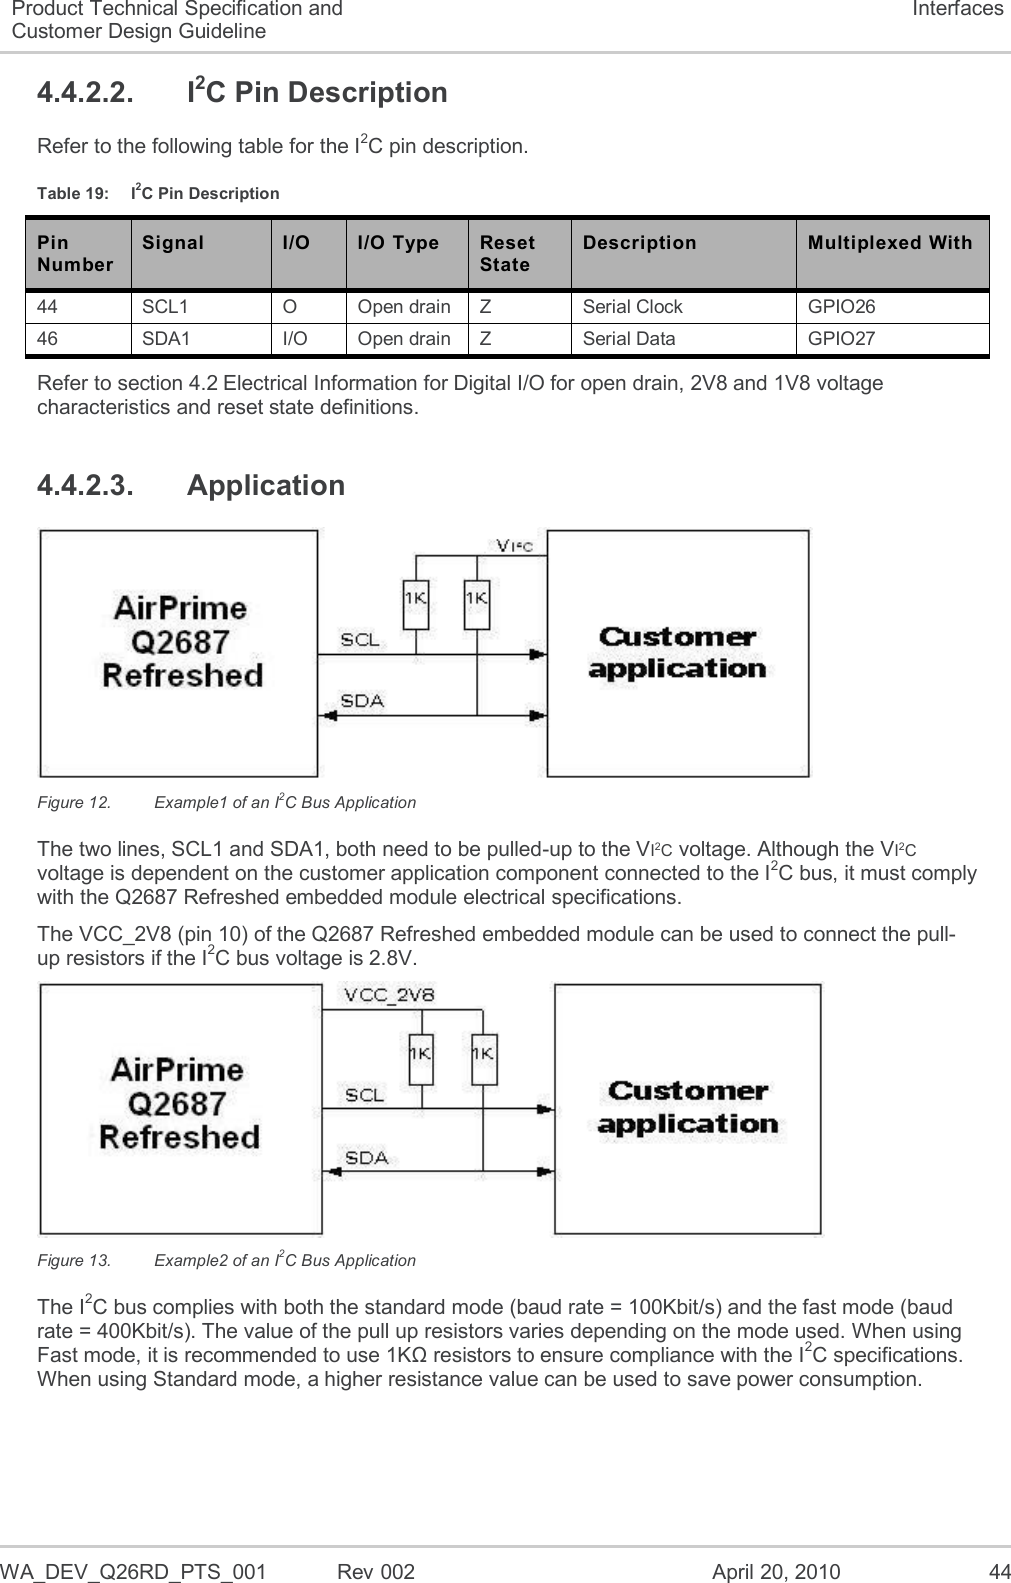  WA_DEV_Q26RD_PTS_001  Rev 002  April 20, 2010 44 Product Technical Specification and Customer Design Guideline Interfaces 4.4.2.2.  I2C Pin Description Refer to the following table for the I2C pin description. Table 19:  I2C Pin Description Pin Number Signal I/O I/O Type Reset State Description Multiplexed With 44 SCL1 O Open drain Z Serial Clock GPIO26 46 SDA1 I/O Open drain Z Serial Data GPIO27 Refer to section 4.2 Electrical Information for Digital I/O for open drain, 2V8 and 1V8 voltage characteristics and reset state definitions. 4.4.2.3.  Application  Figure 12.  Example1 of an I2C Bus Application The two lines, SCL1 and SDA1, both need to be pulled-up to the VI2C voltage. Although the VI2C voltage is dependent on the customer application component connected to the I2C bus, it must comply with the Q2687 Refreshed embedded module electrical specifications. The VCC_2V8 (pin 10) of the Q2687 Refreshed embedded module can be used to connect the pull-up resistors if the I2C bus voltage is 2.8V.   Figure 13.  Example2 of an I2C Bus Application The I2C bus complies with both the standard mode (baud rate = 100Kbit/s) and the fast mode (baud rate = 400Kbit/s). The value of the pull up resistors varies depending on the mode used. When using Fast mode, it is recommended to use 1KΩ resistors to ensure compliance with the I2C specifications. When using Standard mode, a higher resistance value can be used to save power consumption. 